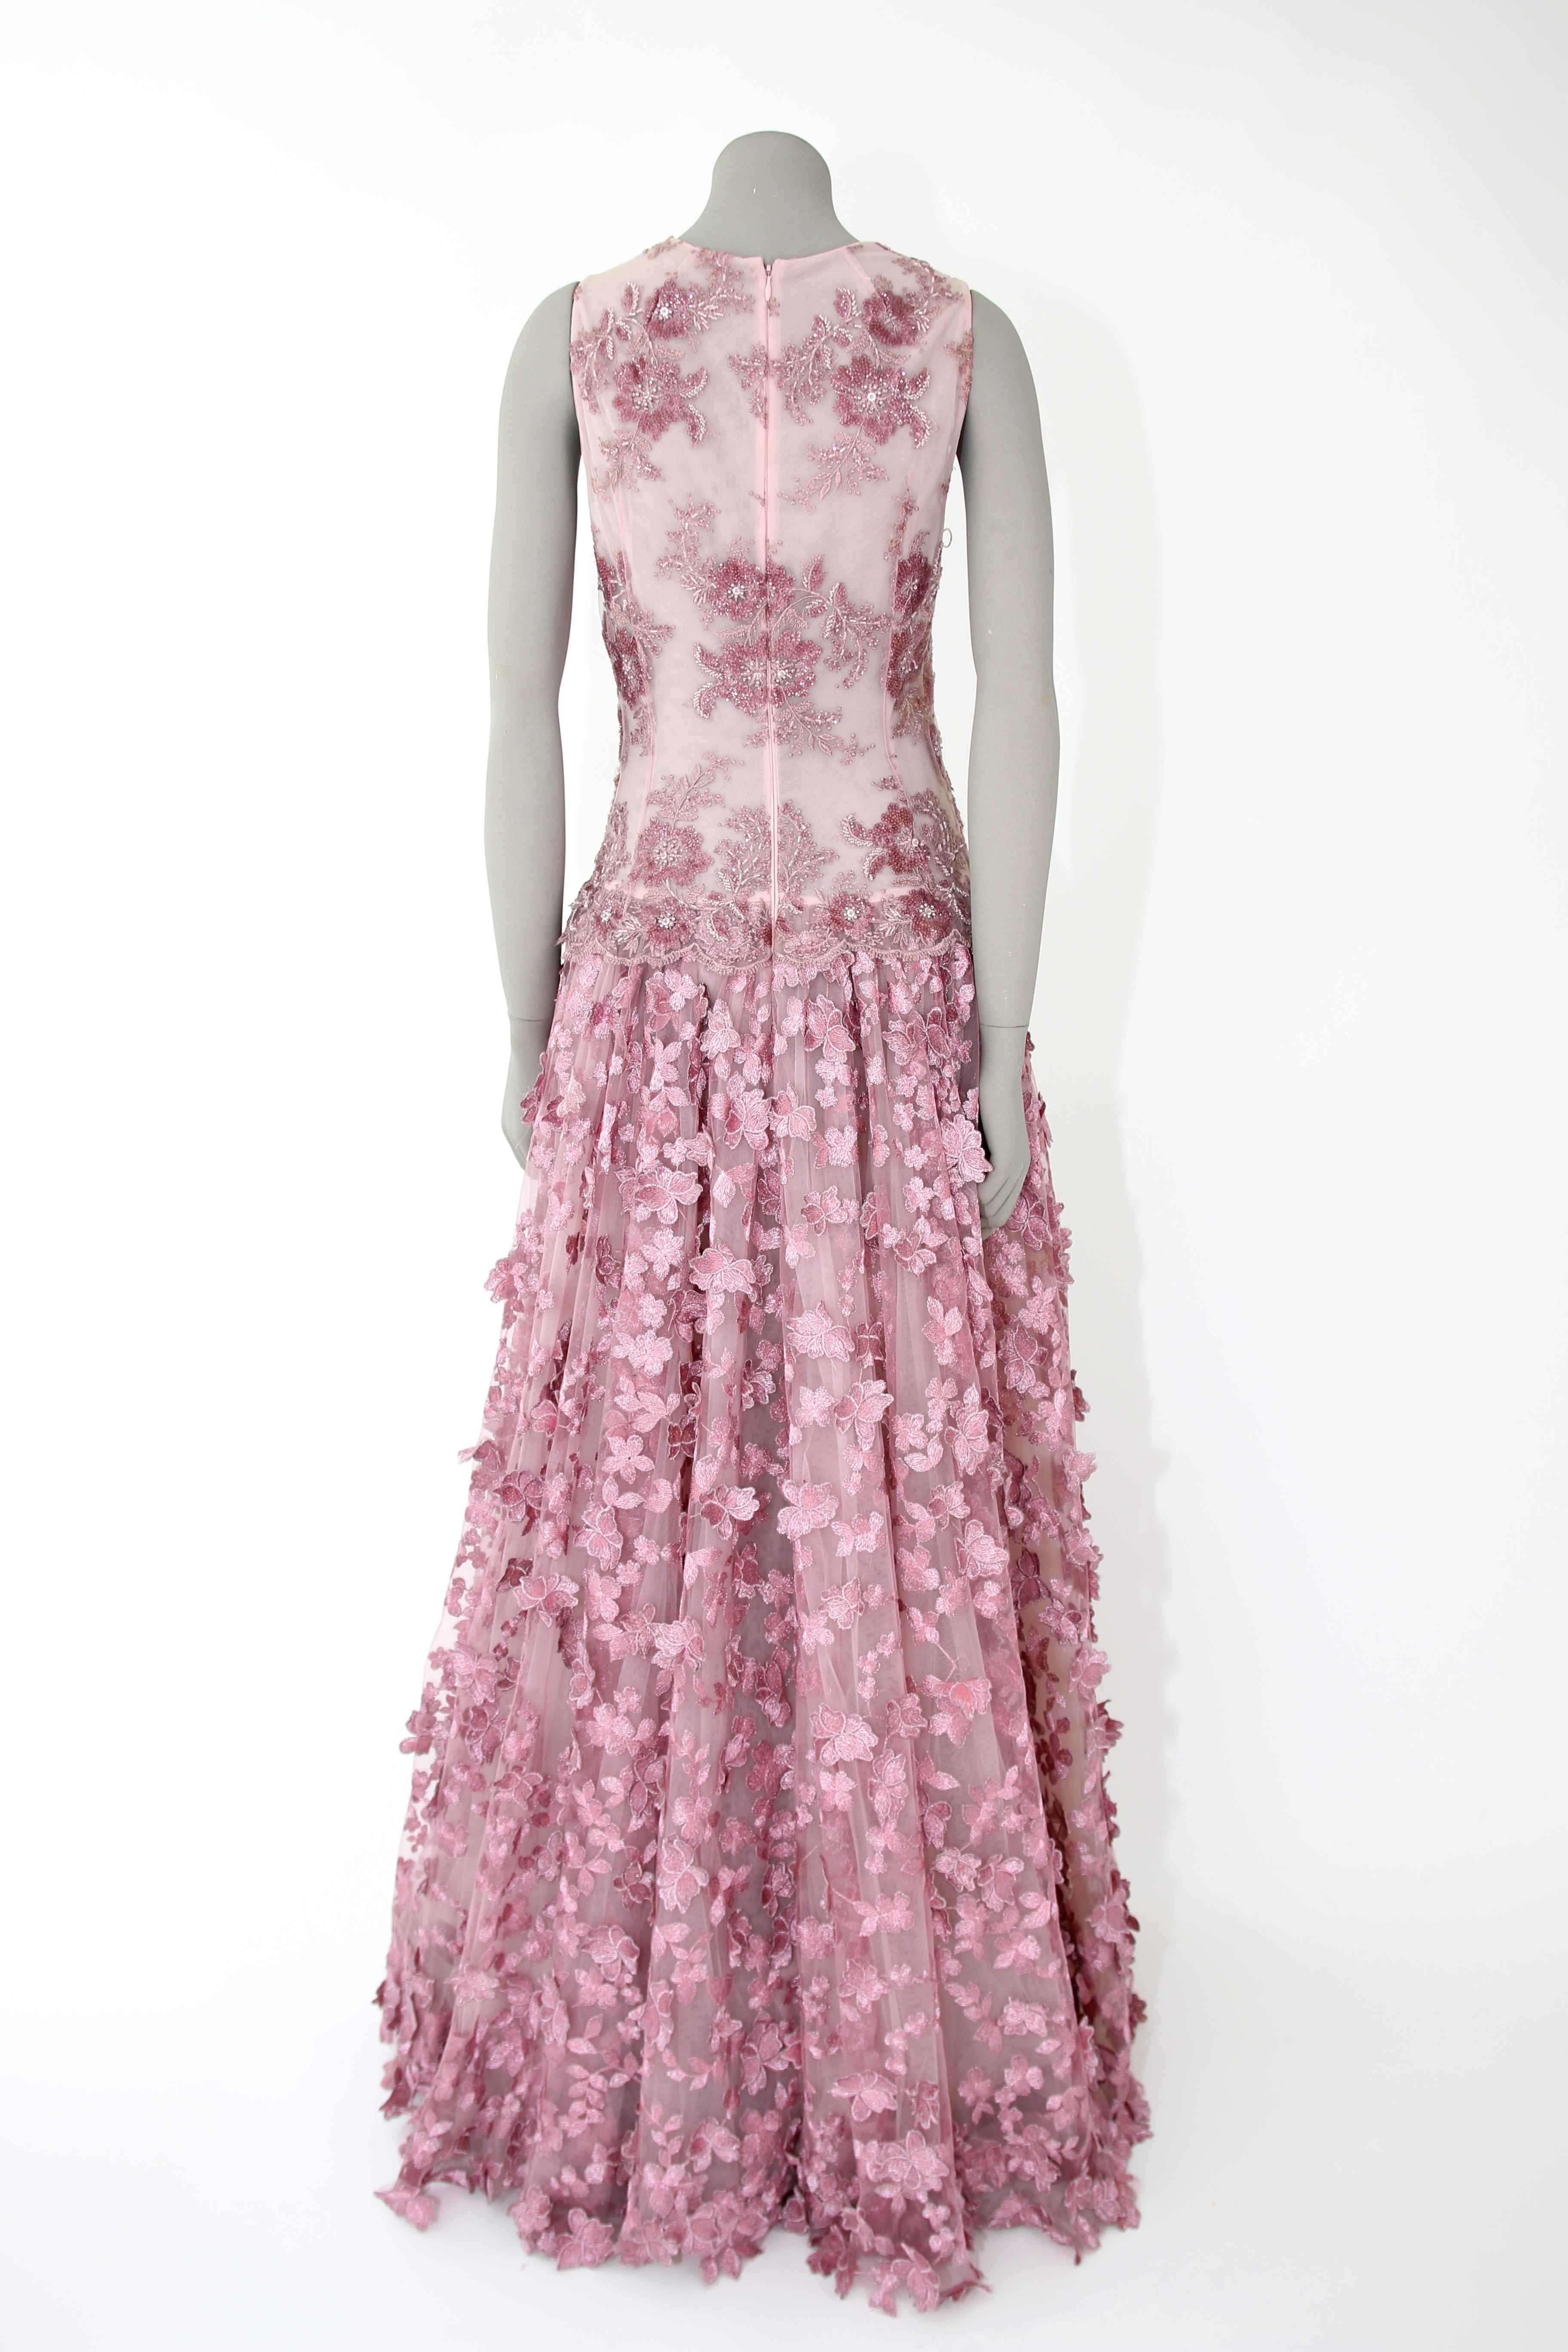 Pelush Pink Tulle Dress Gown With Three Dimensional Flowers And Embroidery - S For Sale 3